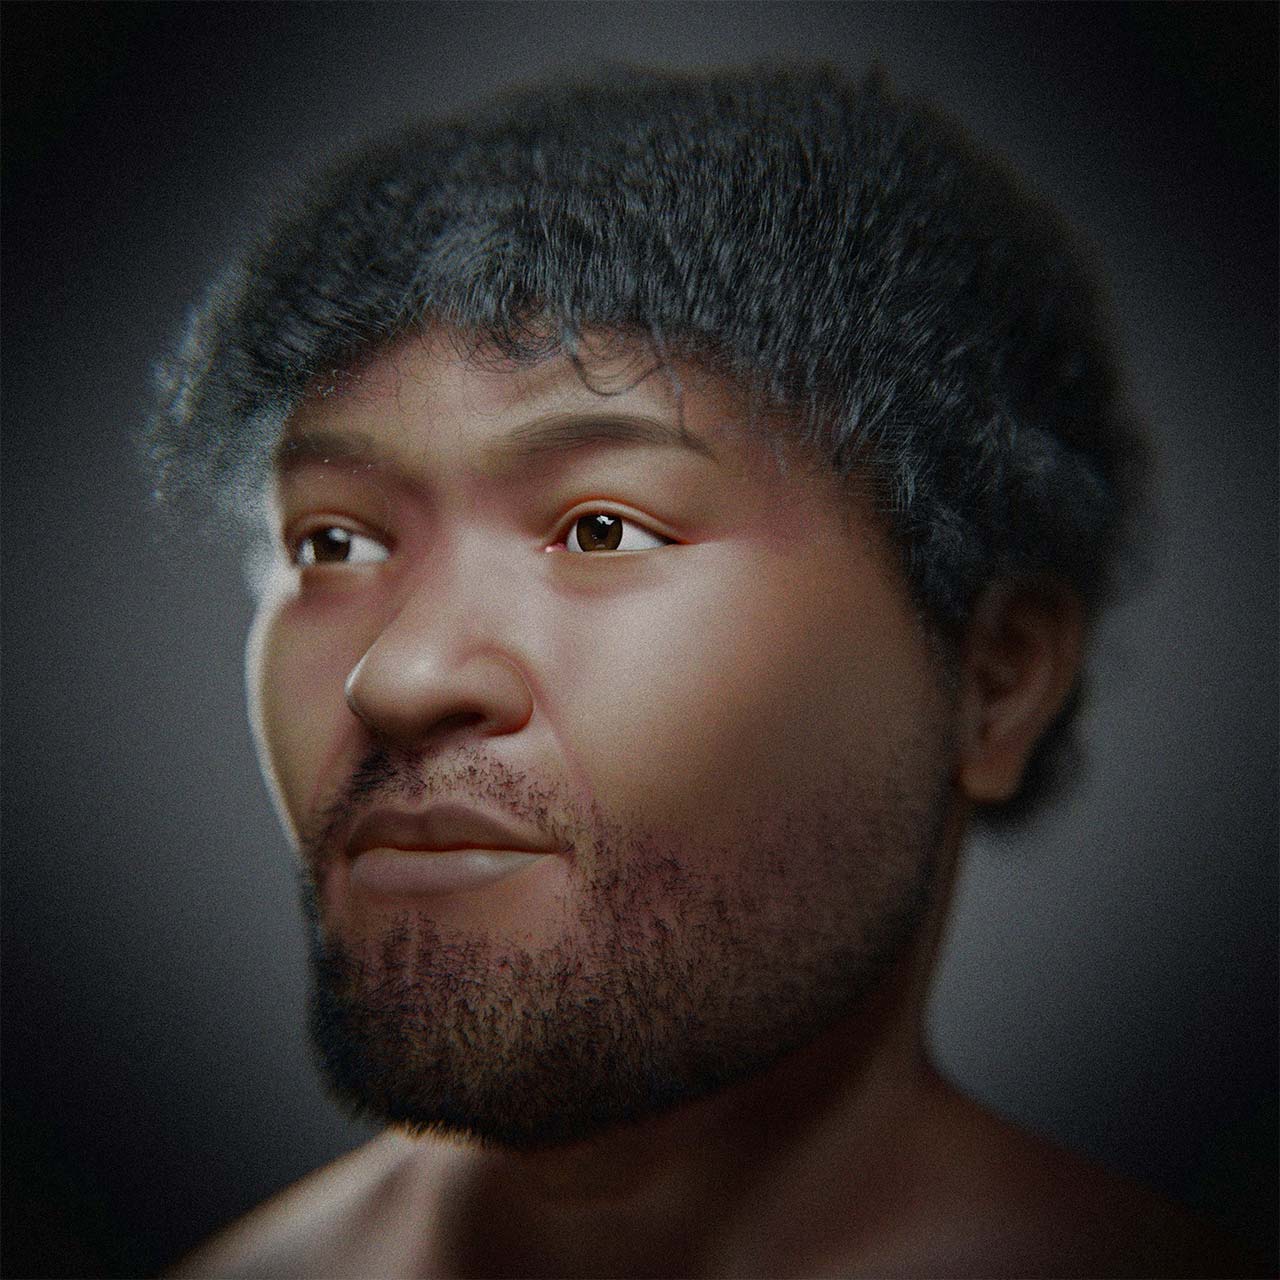 man who lived 35,000 years ago